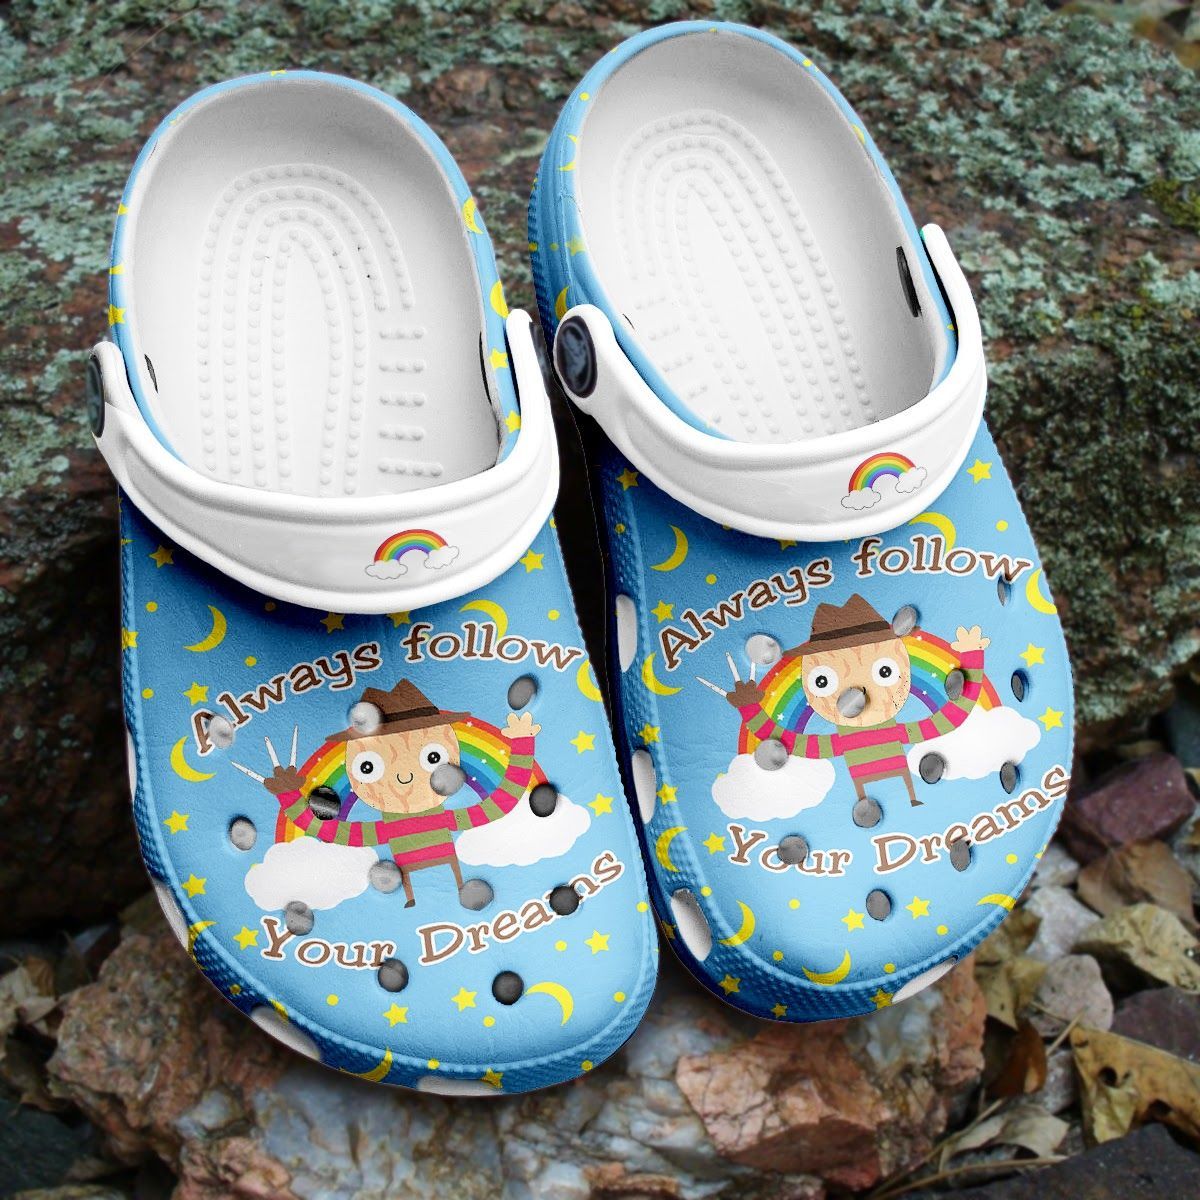 If you'd like to purchase a pair of Crocband Clogs, be sure to check out the official website. 188